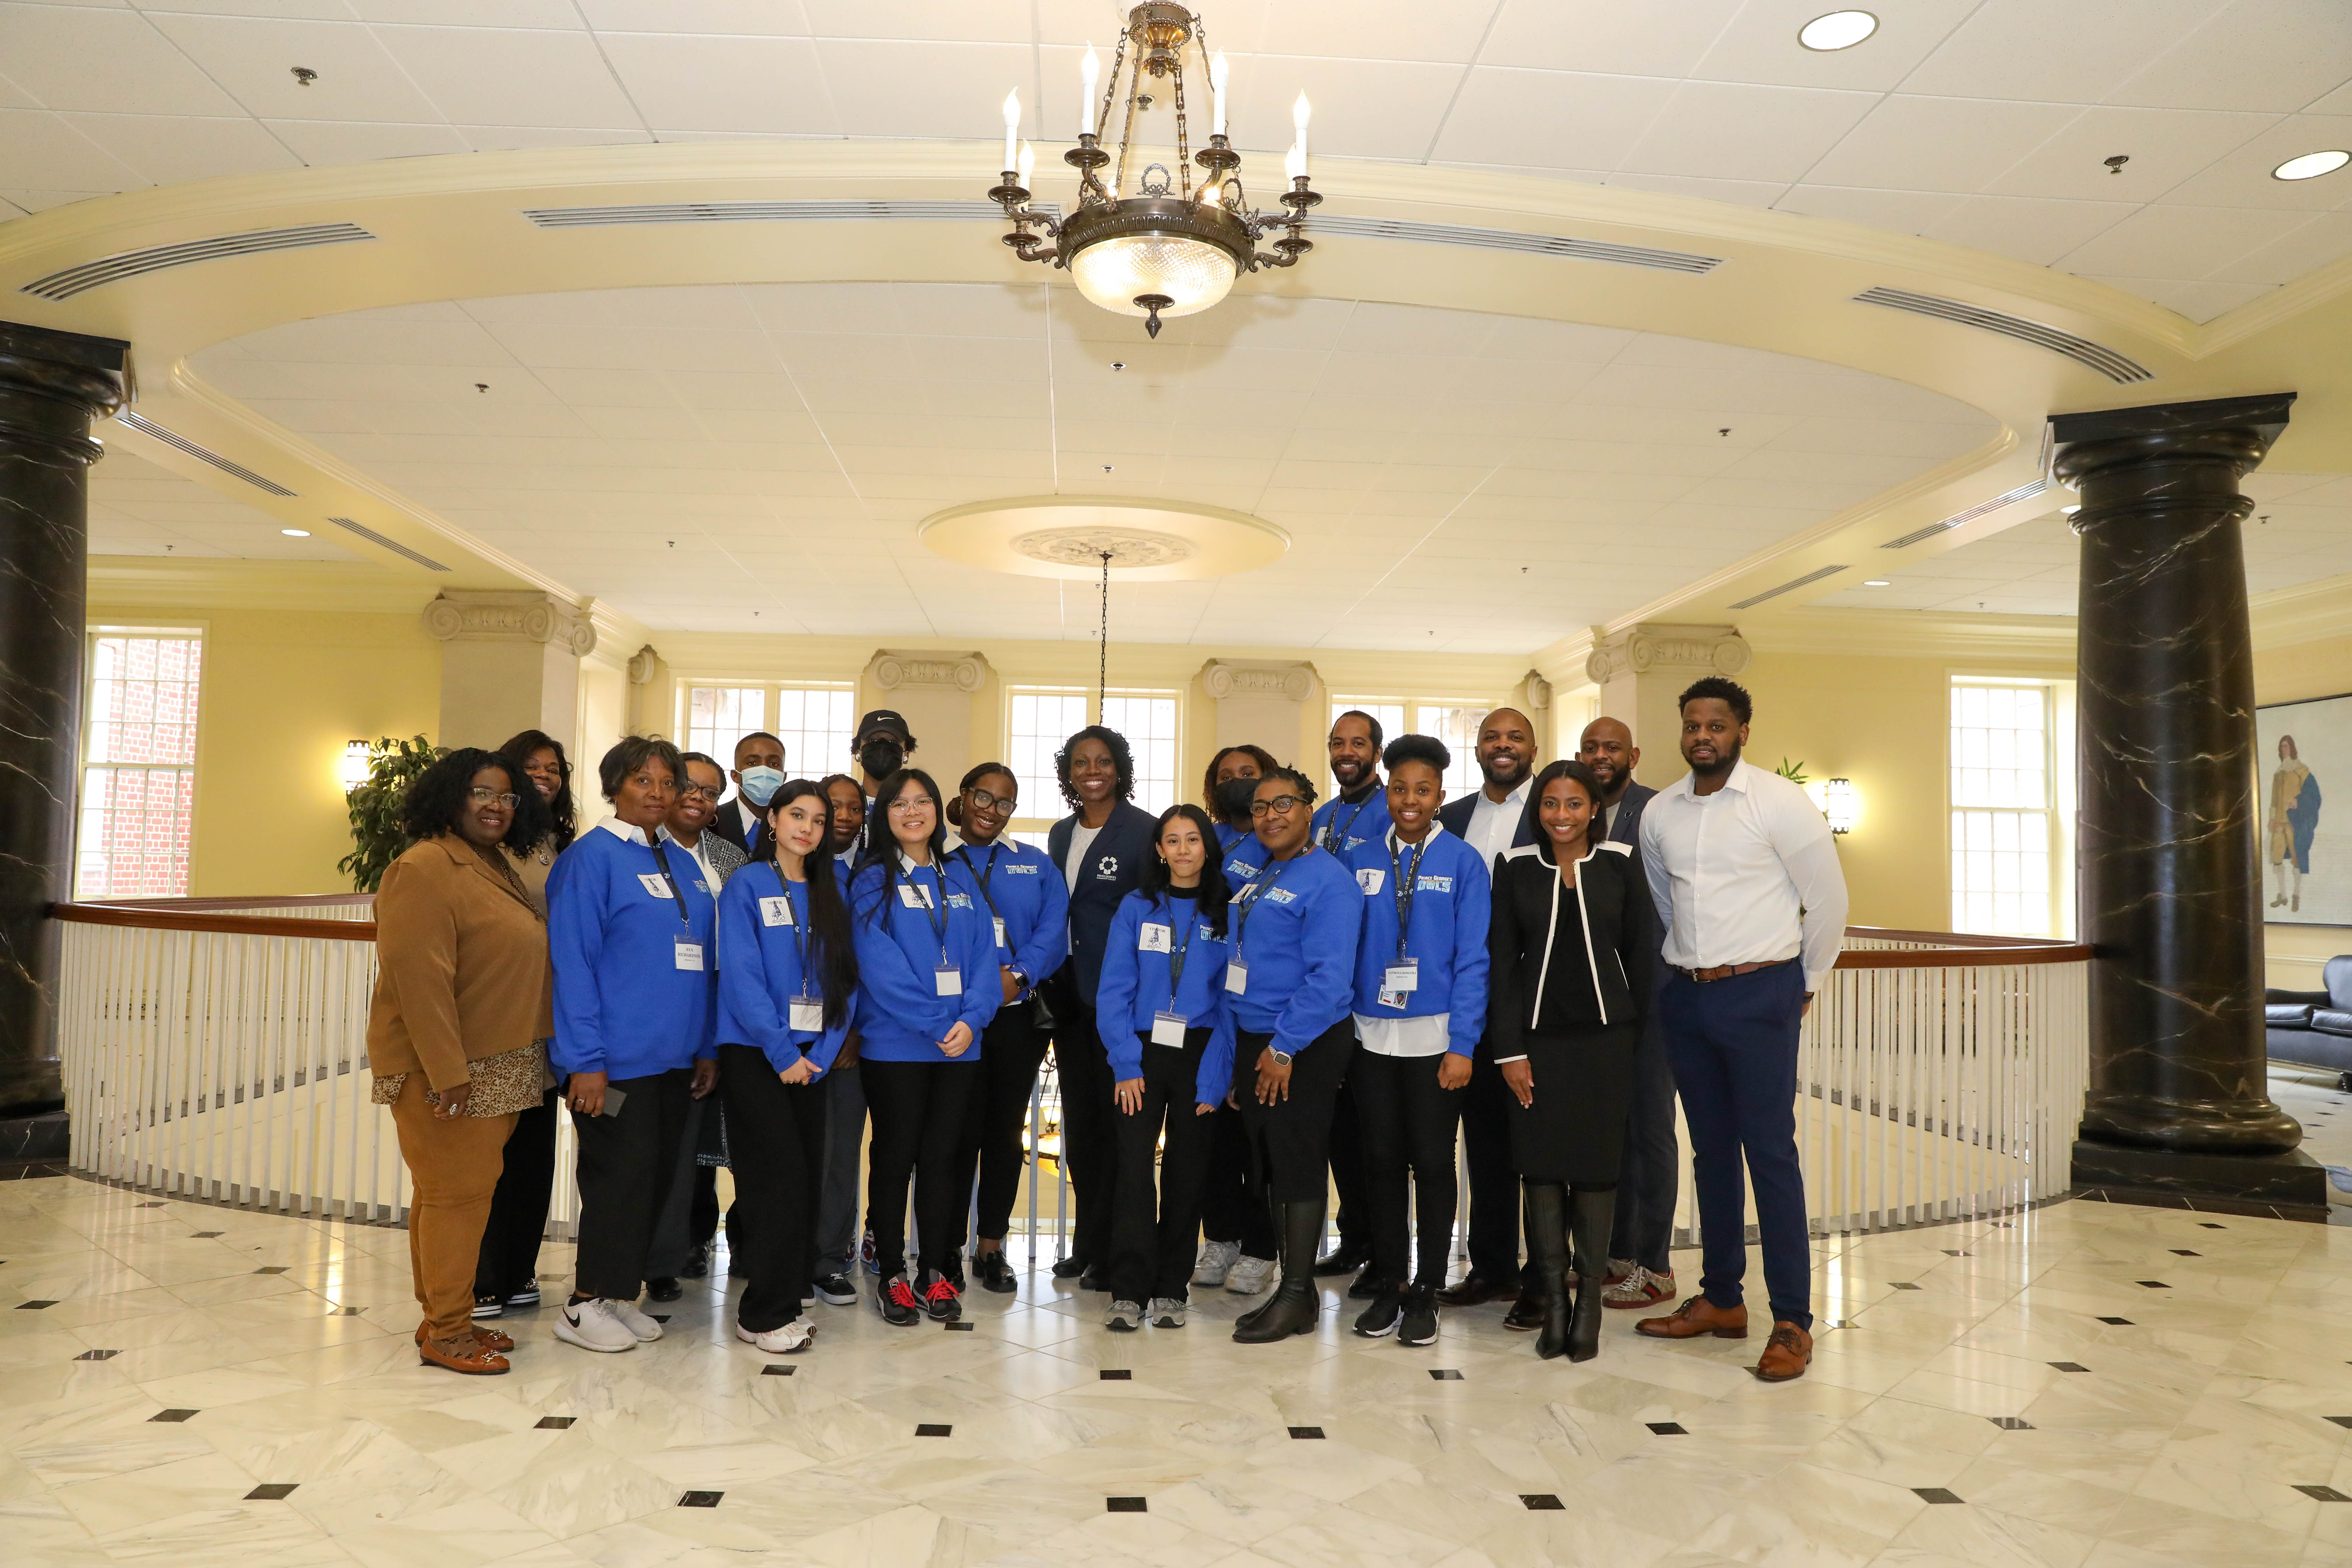 This image is from the visit of student advocates to the Maryland General Assembly, as part of the Maryland Association of Community Colleges’ (MACC) Student Advocacy Day on Friday, March 10, 2023.